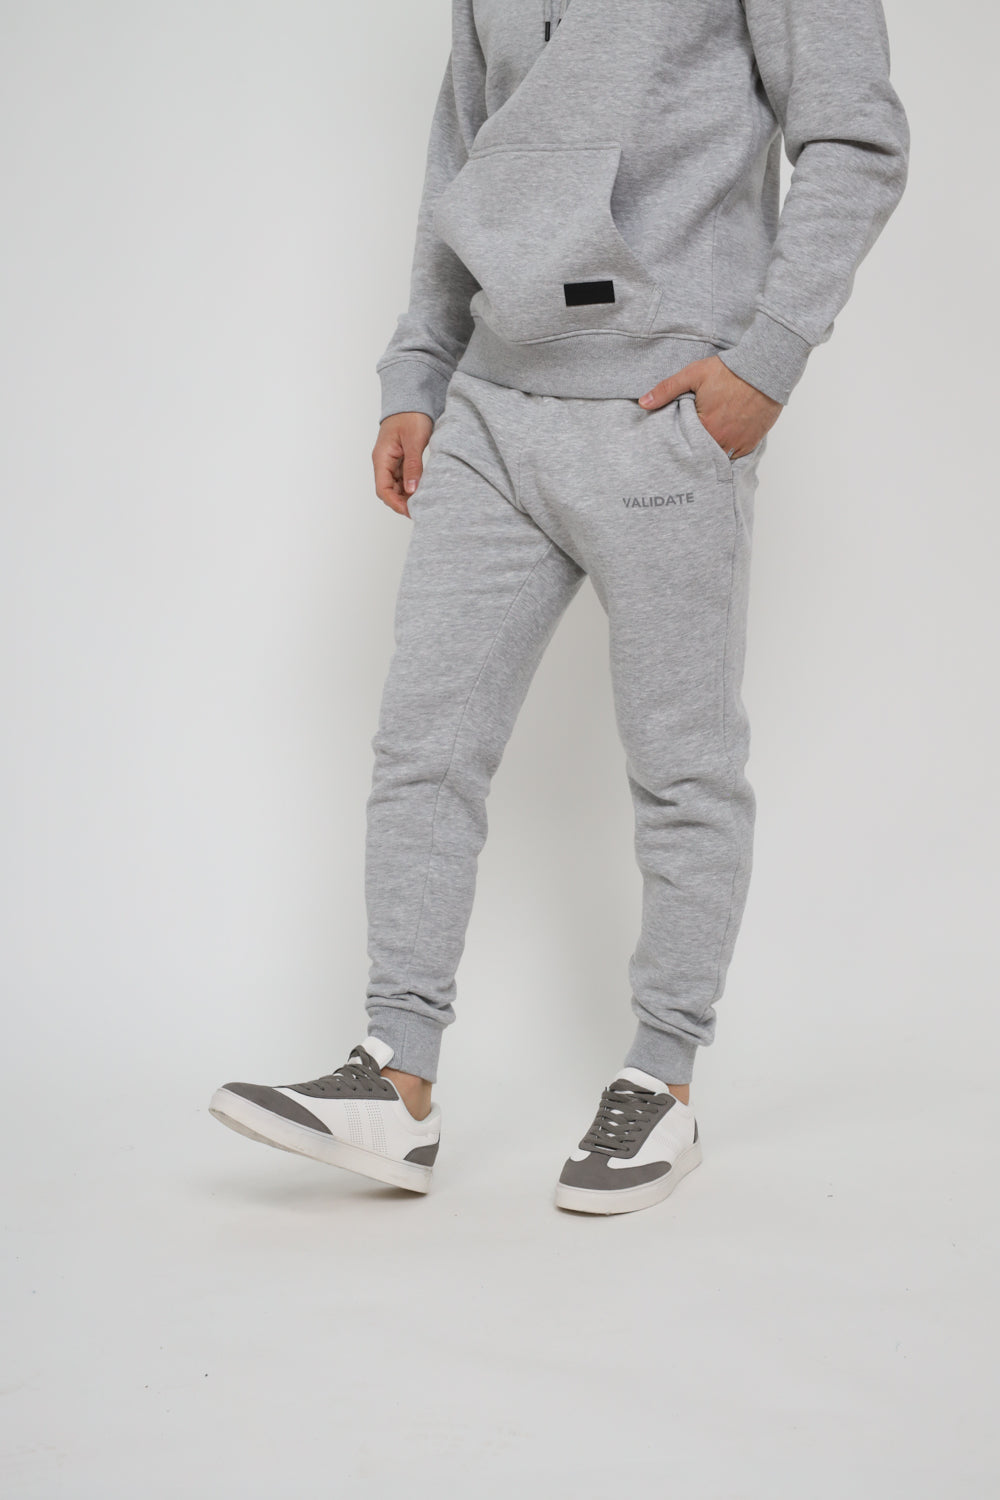 Validate Toby Joggers Heather Grey